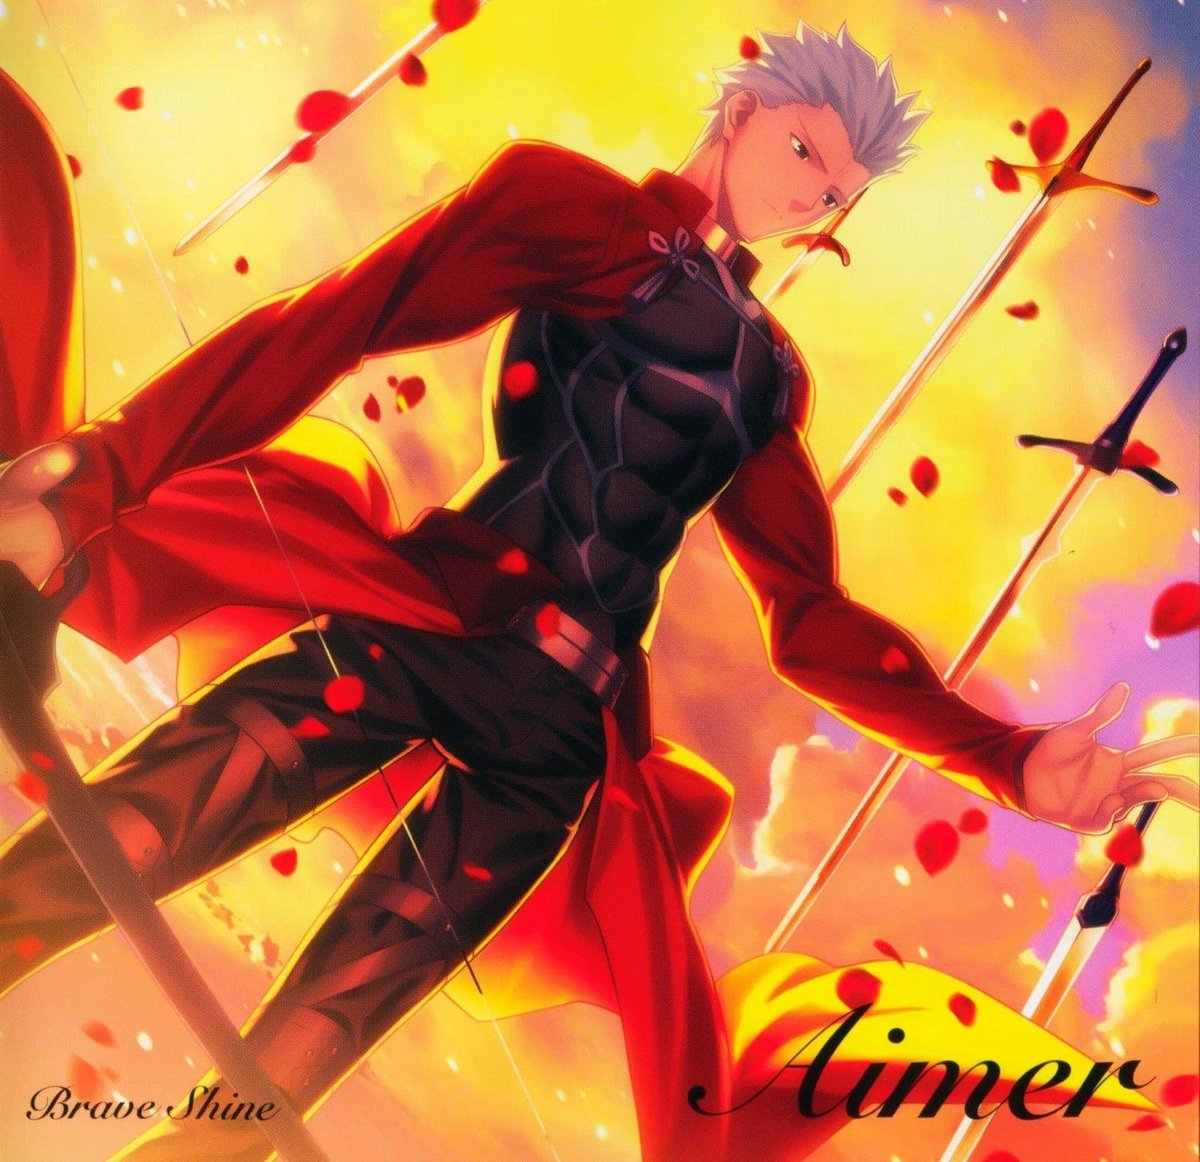 Aniplaylist Fate Stay Night Unlimited Blade Works 2nd Season Opening Brave Shine By Aimer Is Available On Spotify T Co Sgfrkuzea8 More Songs T Co Ecfqcigoif T Co Lpvxeoowta